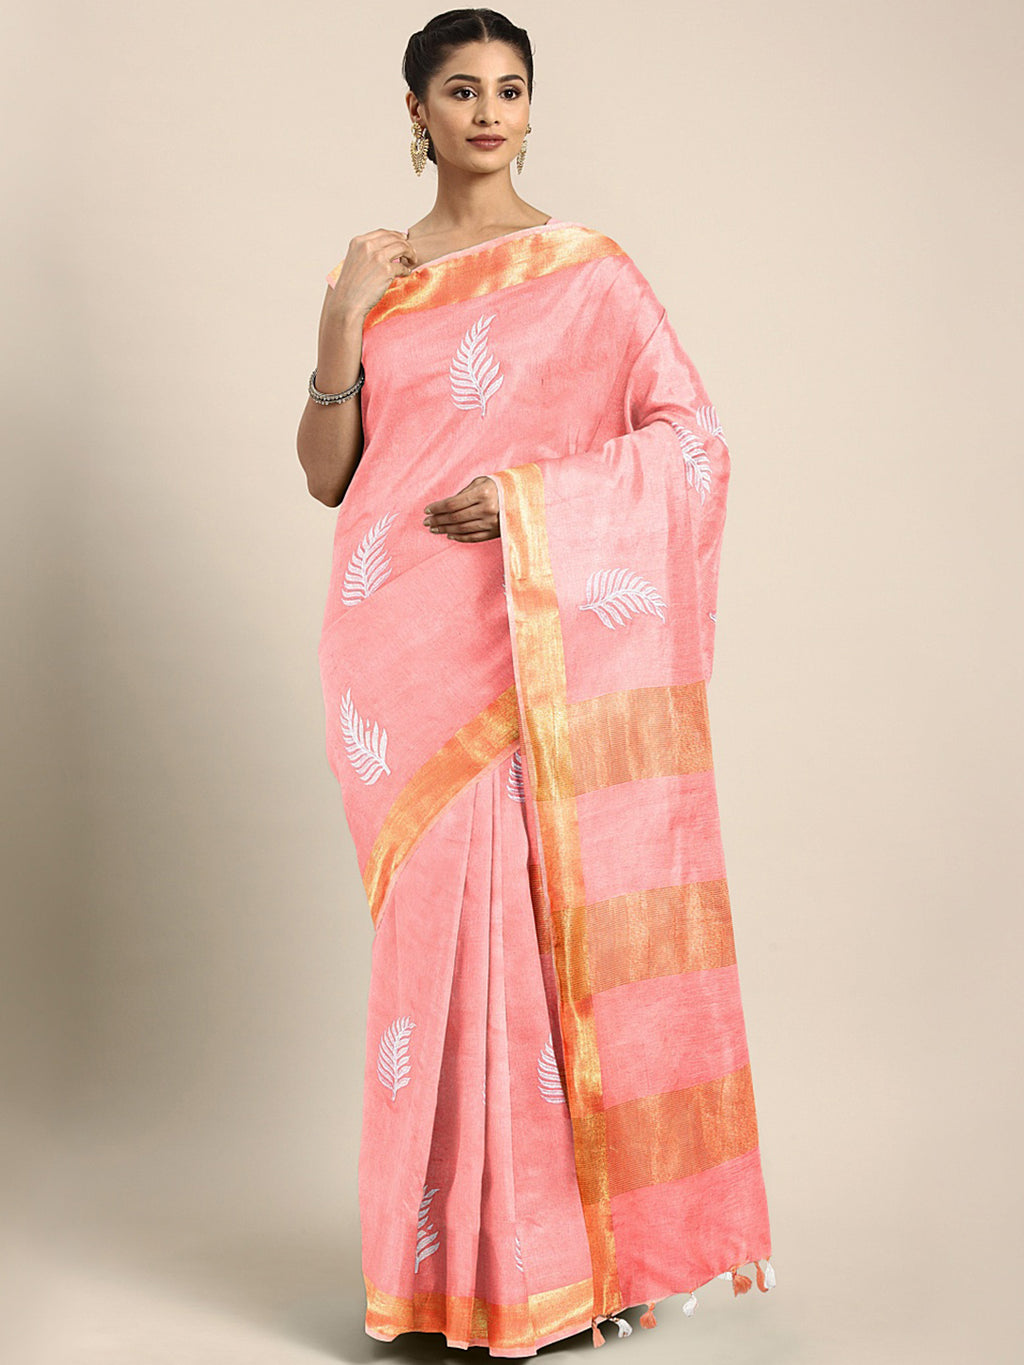 Kalakari India Kota Silk Embroidered Saree With Blouse ALBGSA0167-Saree-Kalakari India-ALBGSA0167-Geographical Indication, Hand Crafted, Heritage Prints, Linen, Natural Dyes, Pure Cotton, Sarees, Sustainable Fabrics, Woven-[Linen,Ethnic,wear,Fashionista,Handloom,Handicraft,Indigo,blockprint,block,print,Cotton,Chanderi,Blue, latest,classy,party,bollywood,trendy,summer,style,traditional,formal,elegant,unique,style,hand,block,print, dabu,booti,gift,present,glamorous,affordable,collectible,Sari,Sare